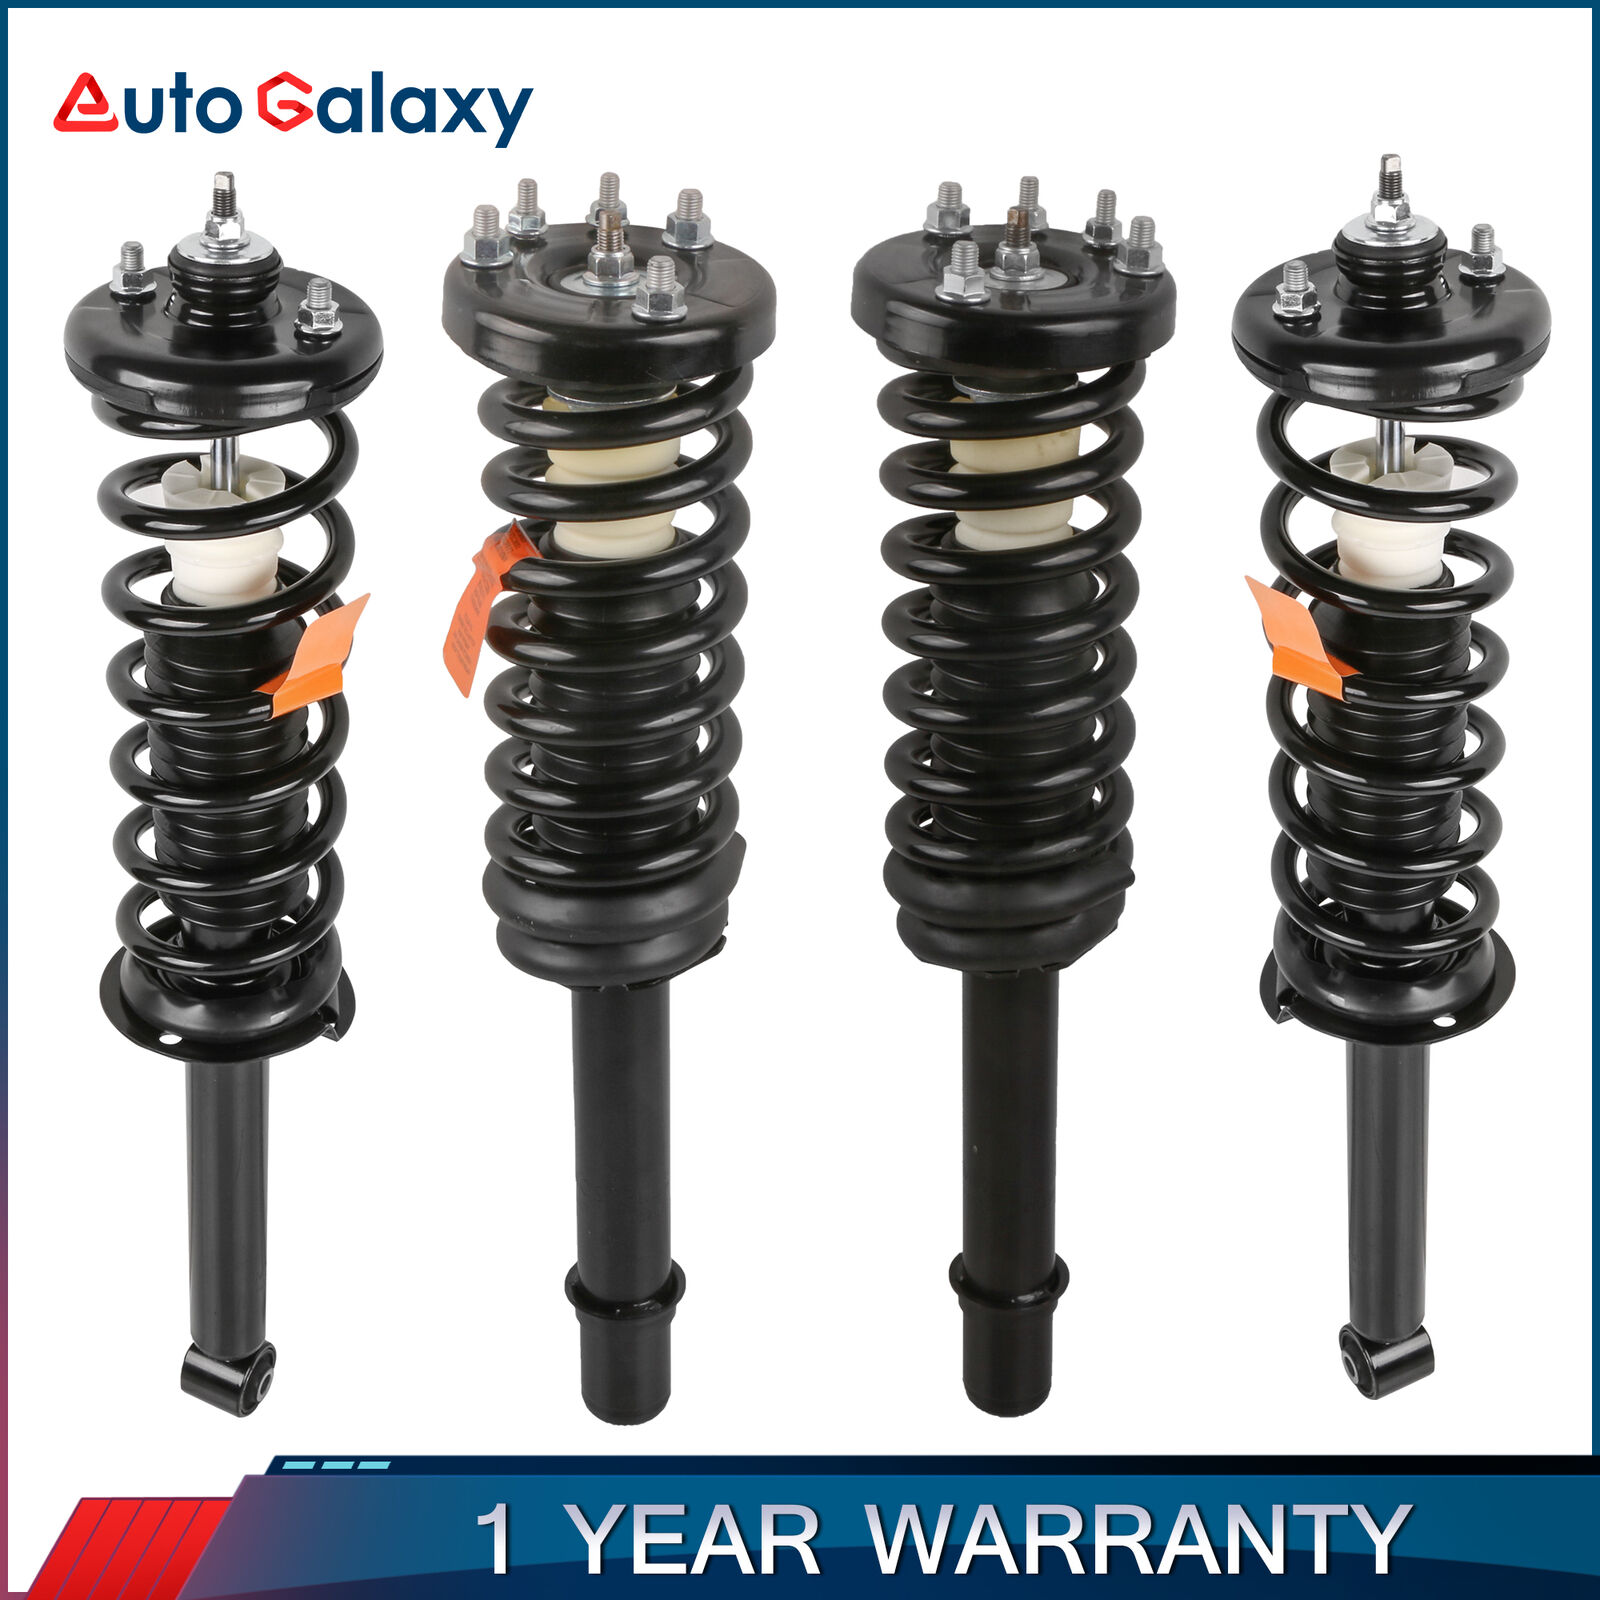 4PCS Front+Rear Complete Shock Struts w/Springs For 2003-2007 Honda Accord EX LX